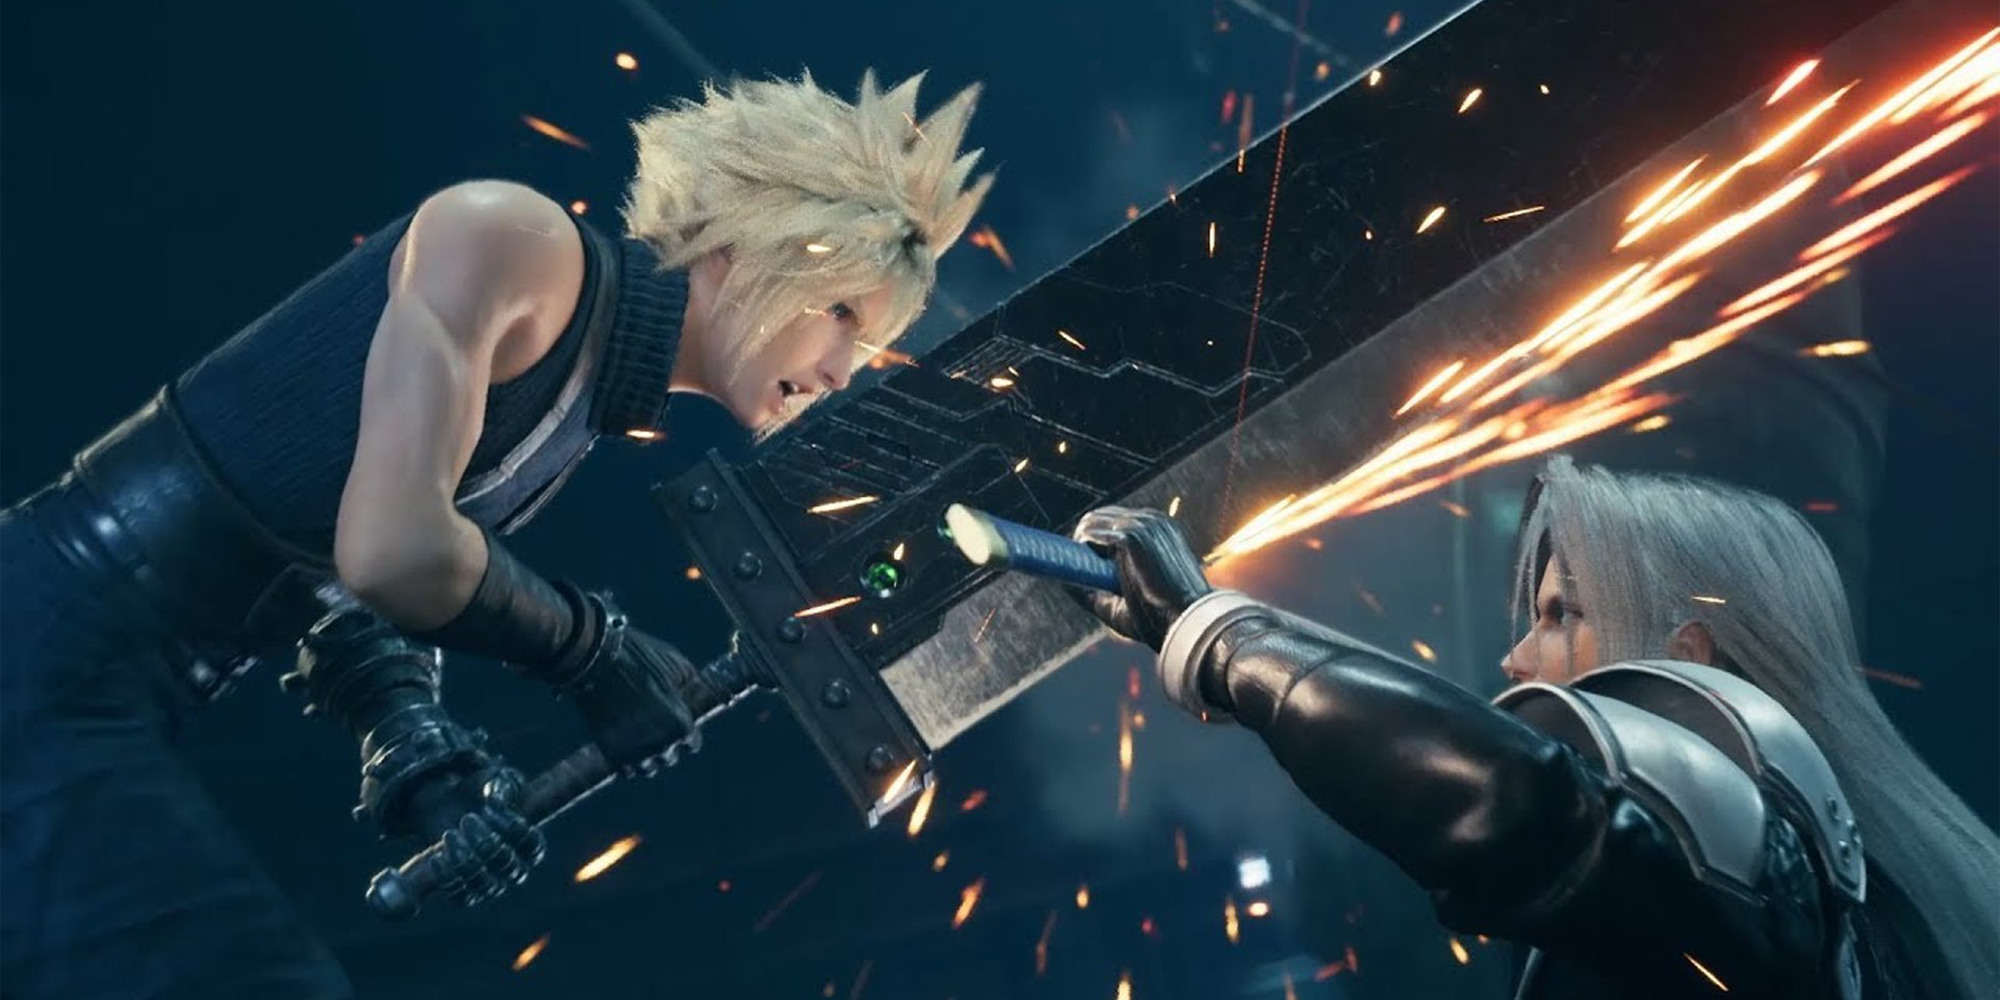 ff7-remake-side-missions-and-story-missions-have-the-same-level-of-quality